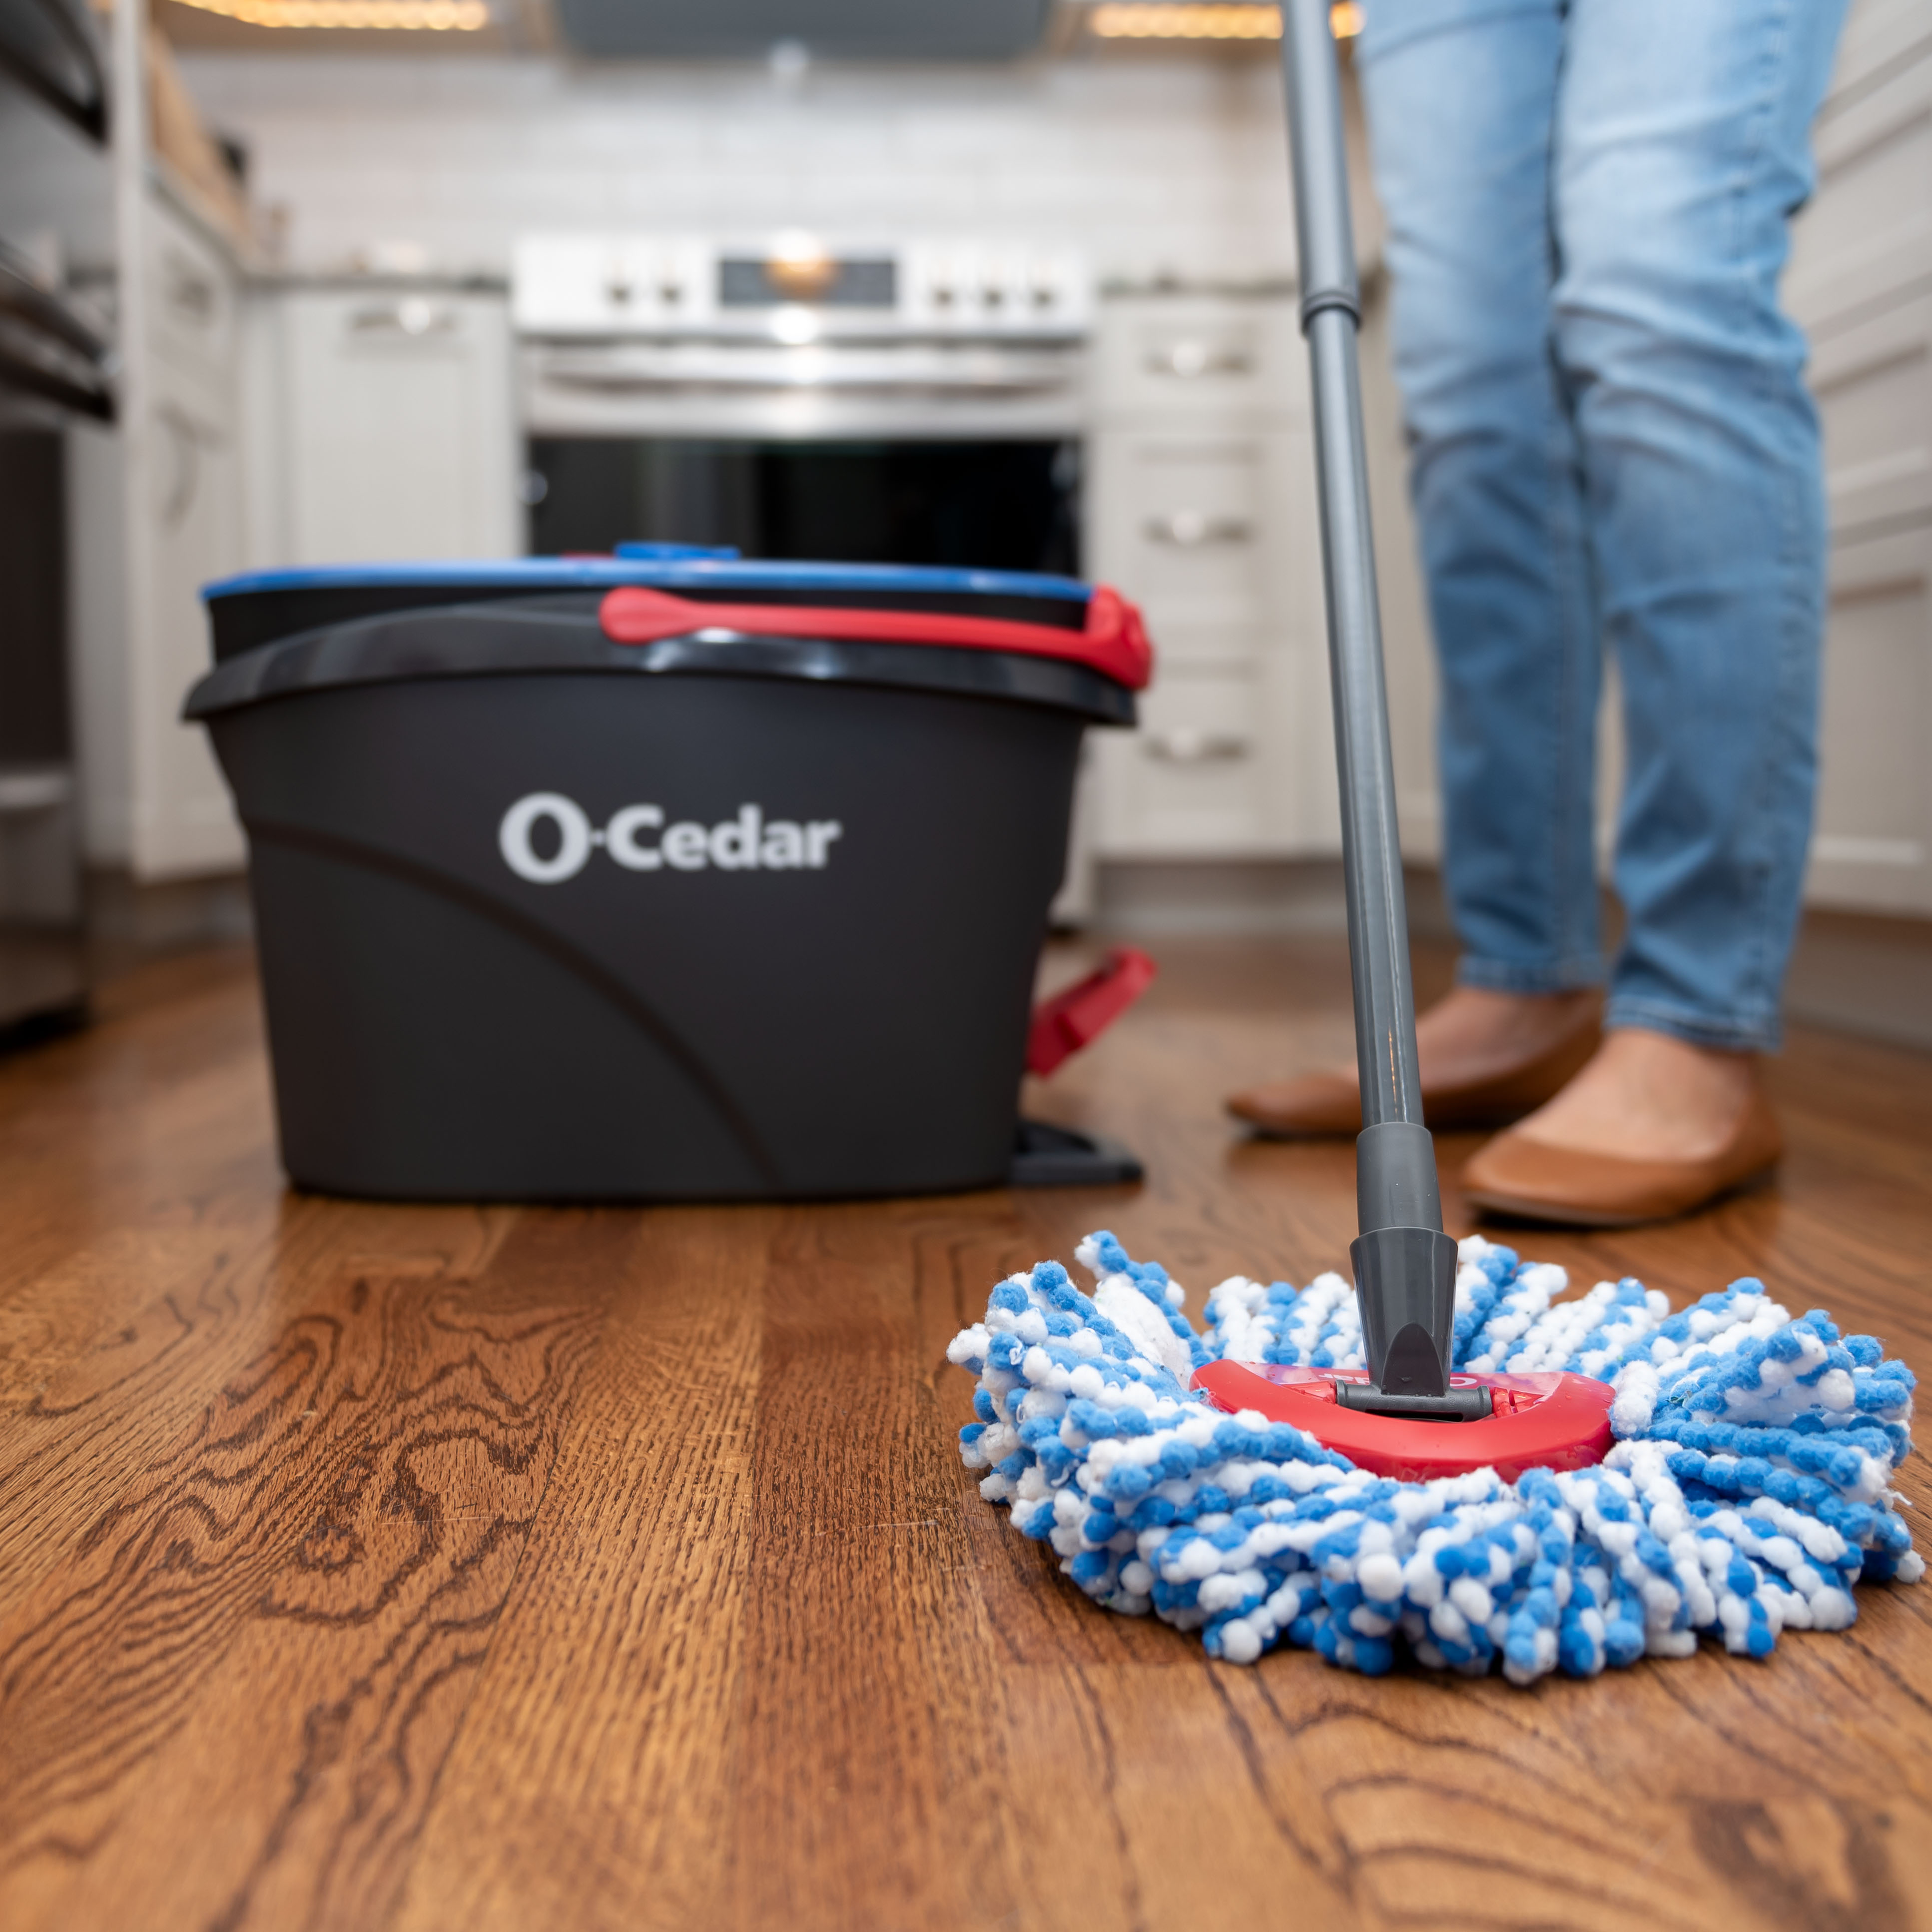 O-Cedar EasyWring RinseClean Spin Mop and Bucket System, Hands-Free System - image 20 of 25